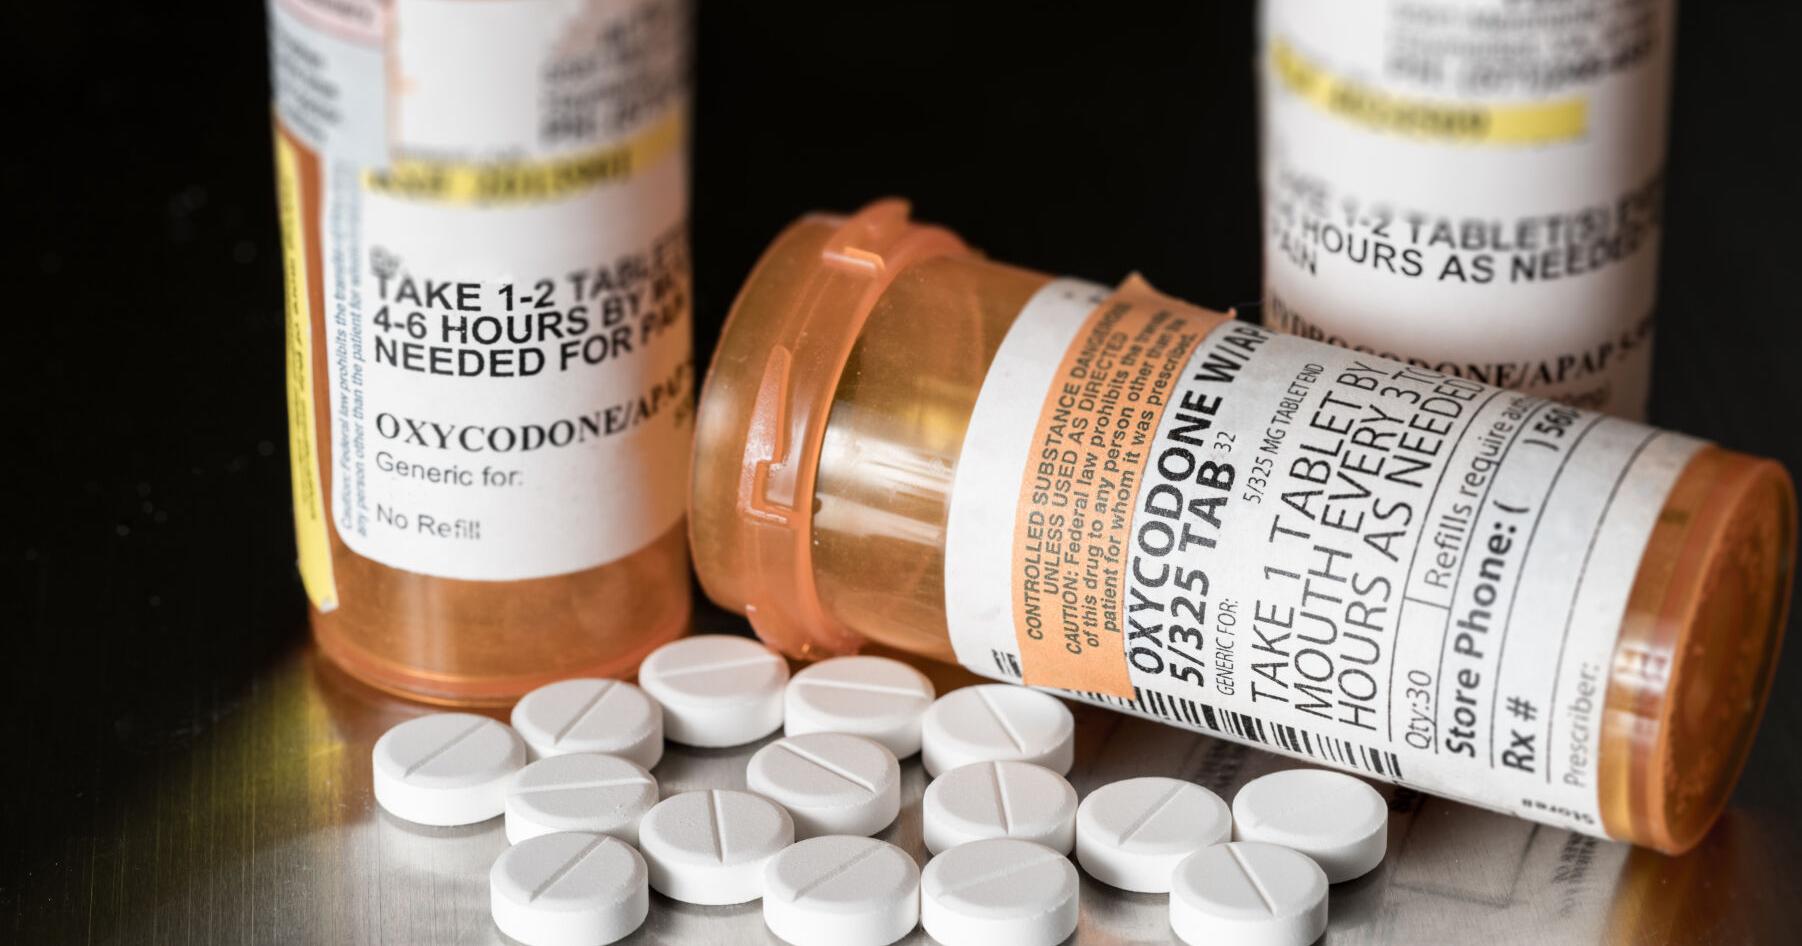 CDC: Hawaii drug overdoses doubled over the last decade